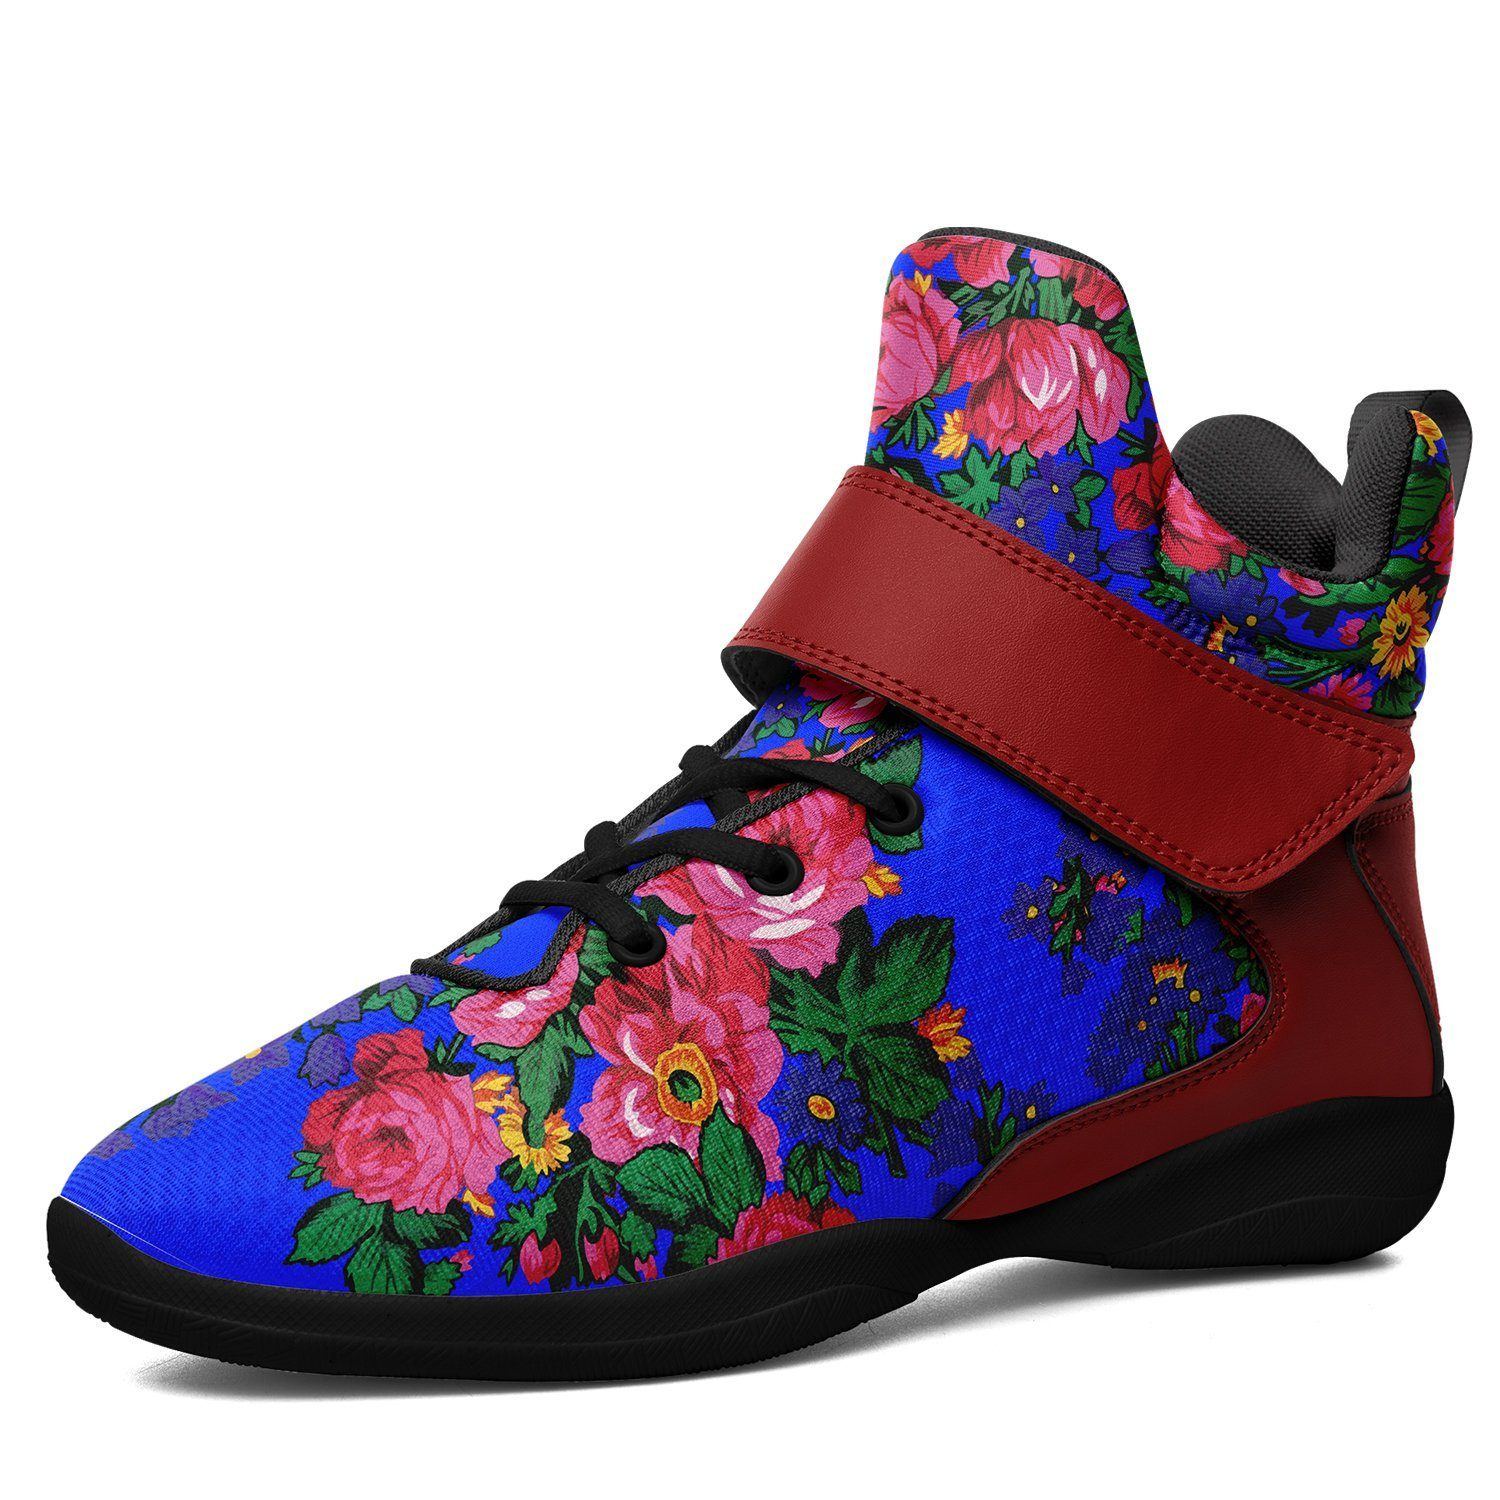 Kokum's Revenge Royal Kid's Ipottaa Basketball / Sport High Top Shoes 49 Dzine US Women 4.5 / US Youth 3.5 / EUR 35 Black Sole with Dark Red Strap 